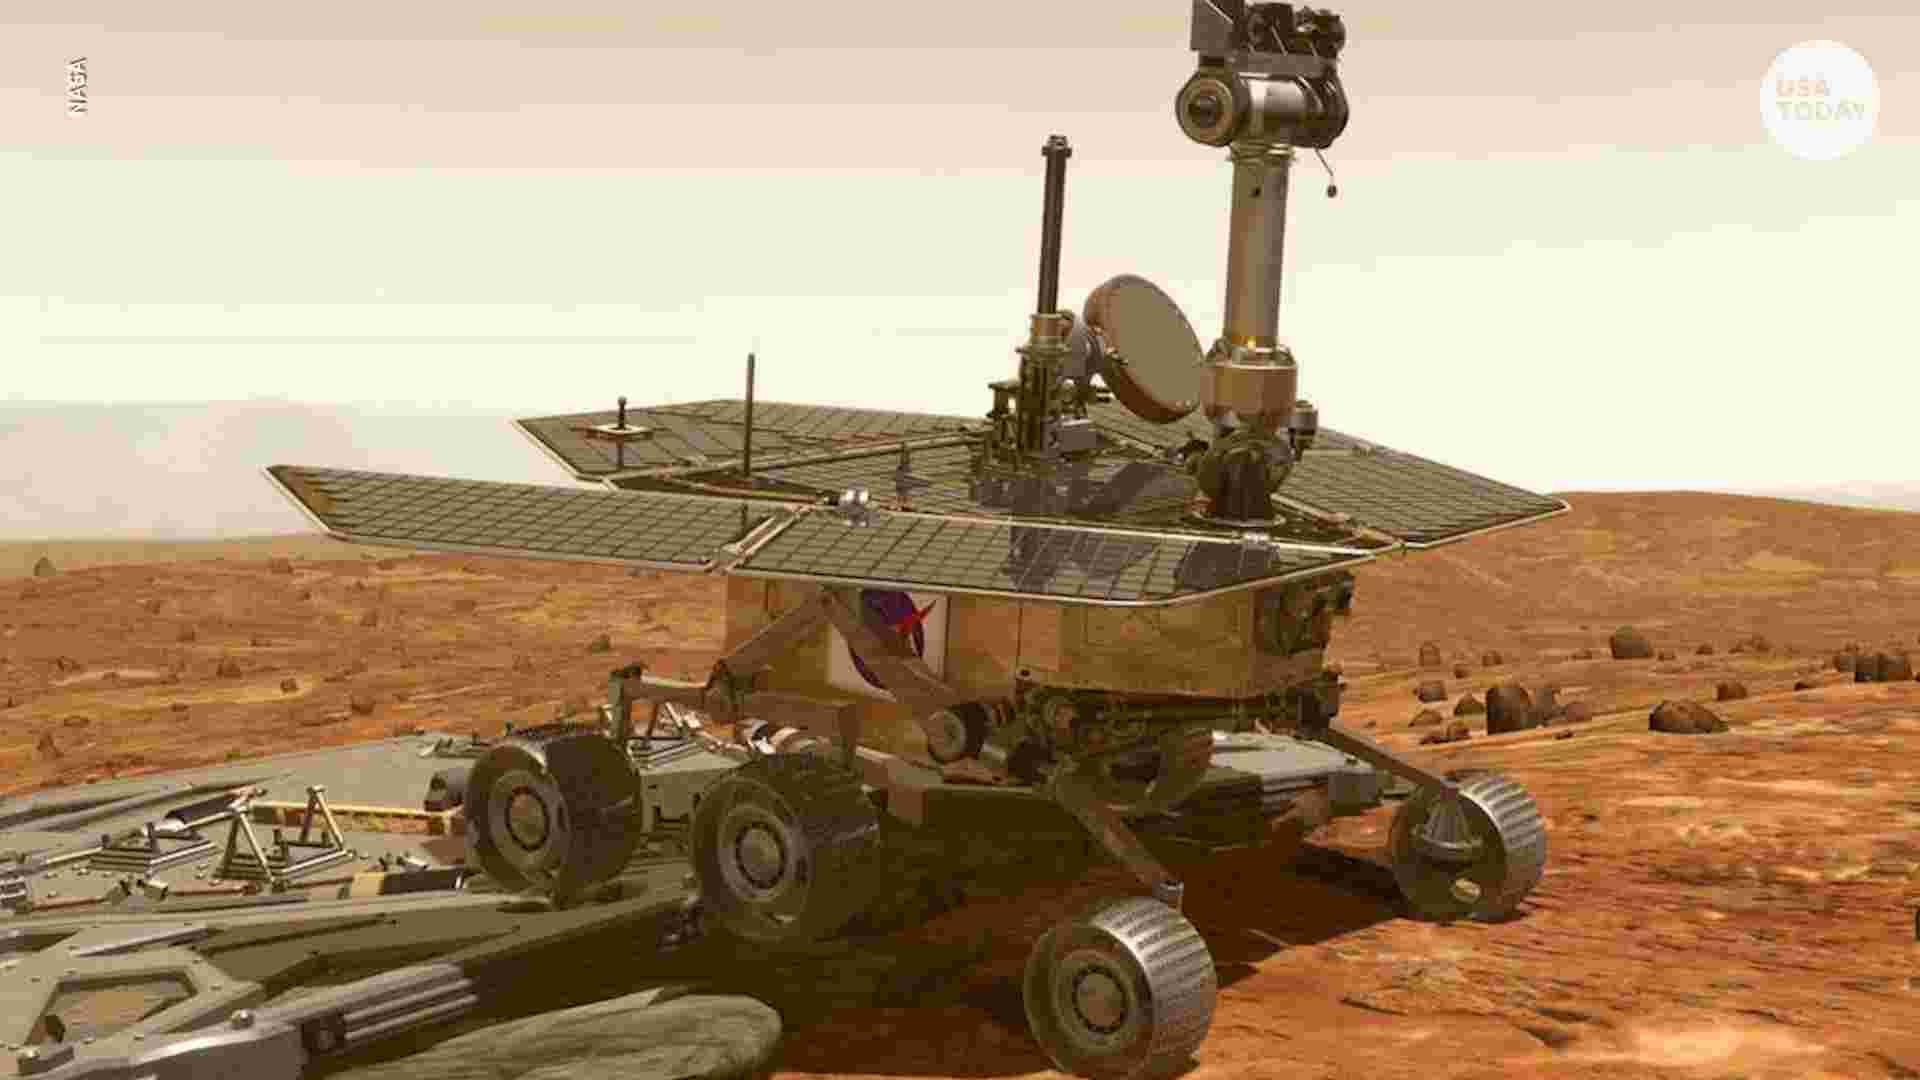 Mars Opportunity: NASA spots silent rover from space